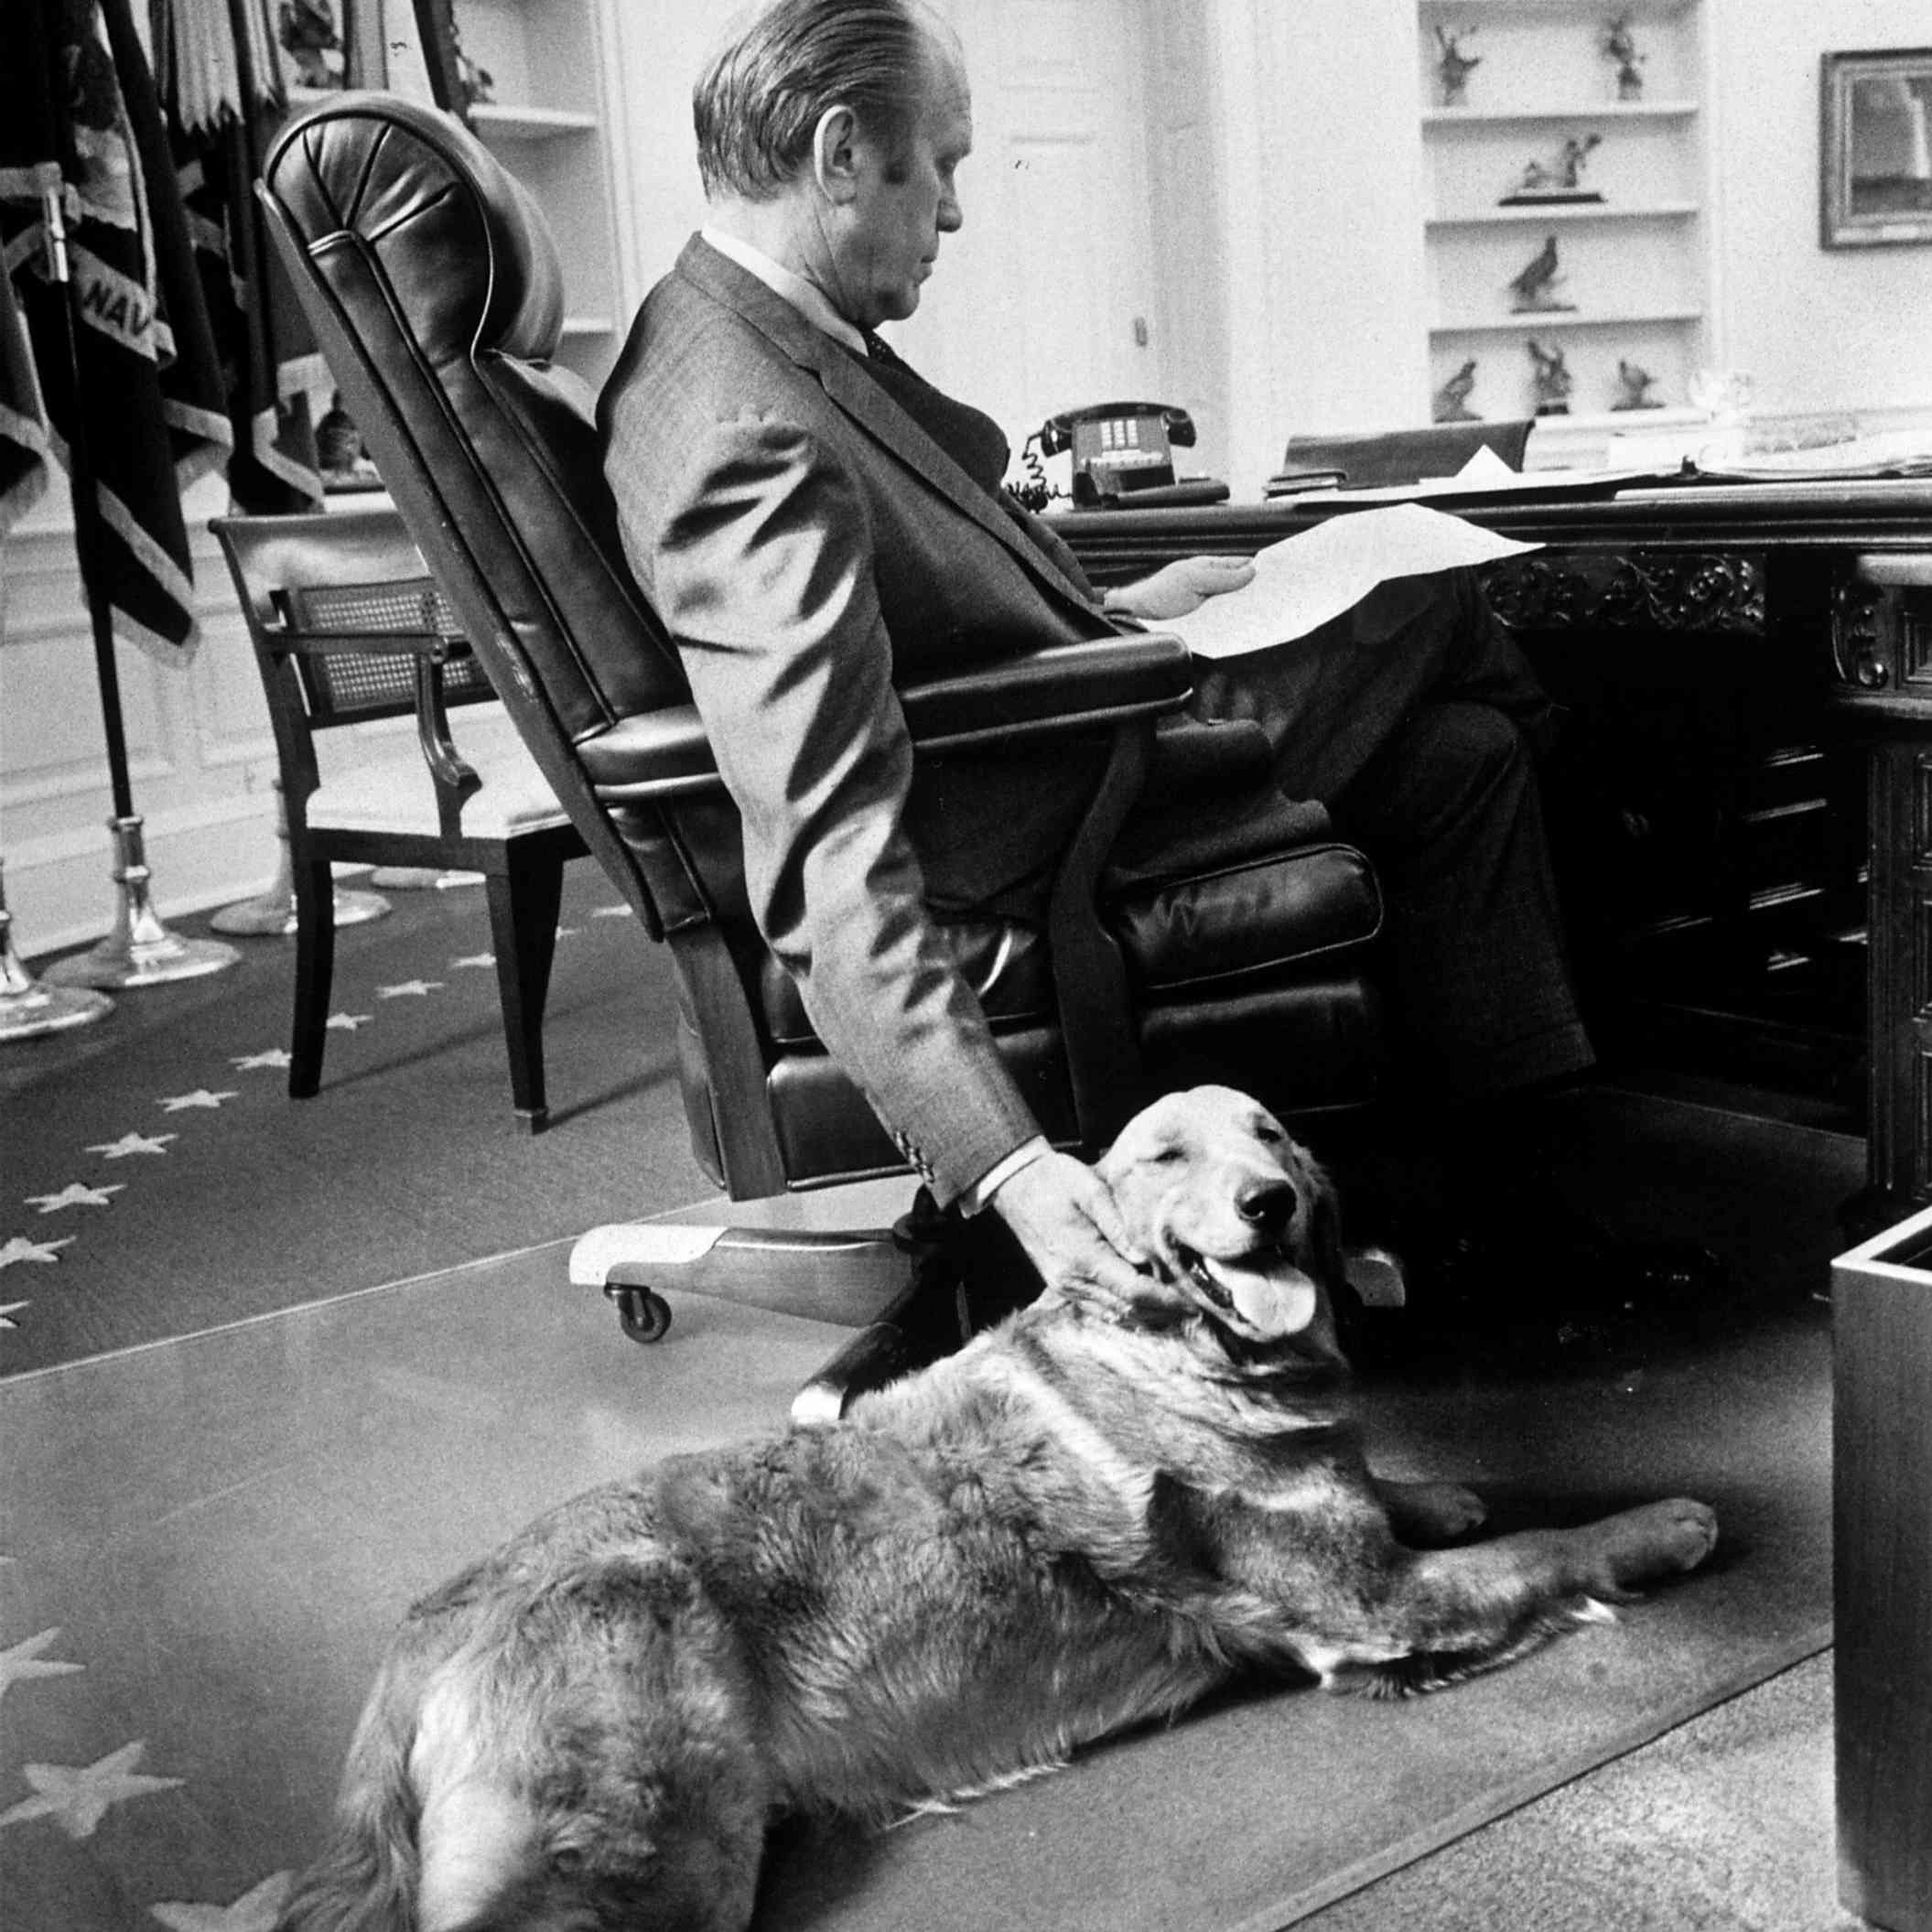 November 1974: Pres. Ford studying budget matters in the Oval Office while petting golden retriever Liberty.